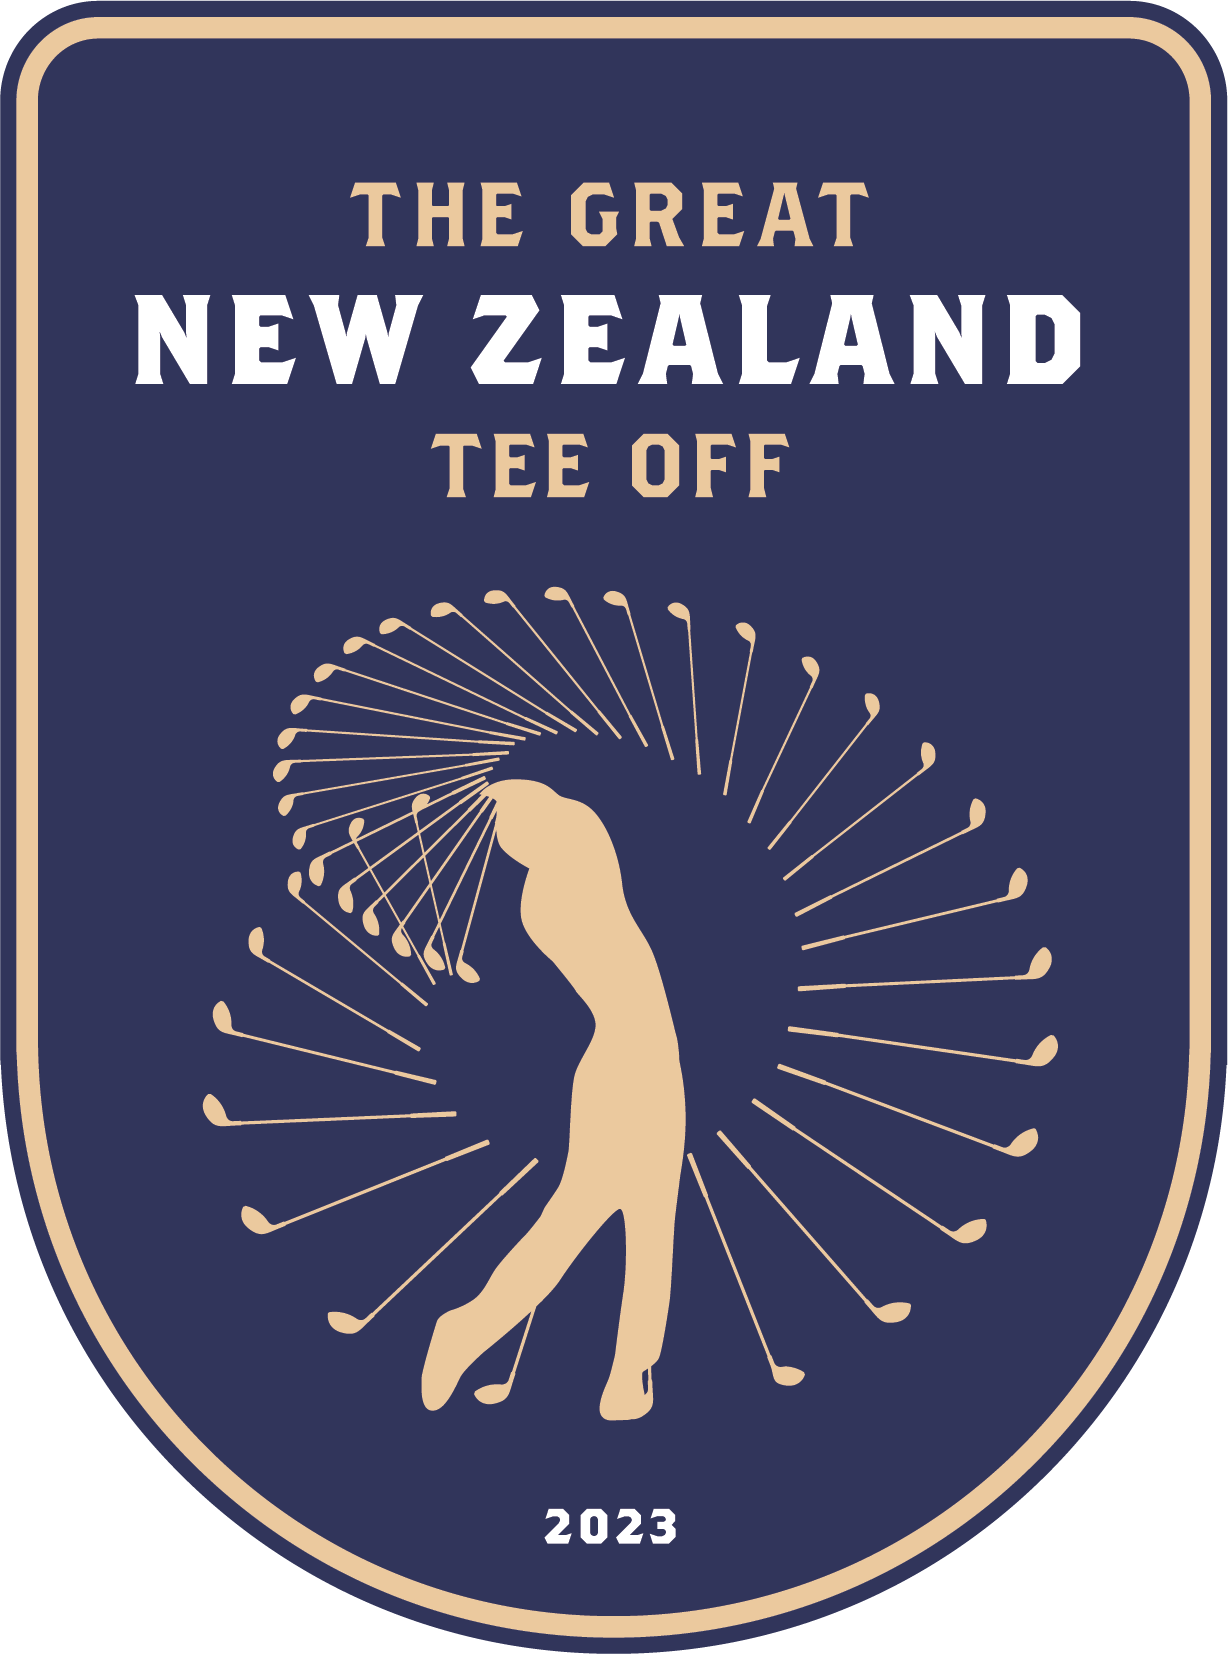 The Great New Zealand Tee Off 2023